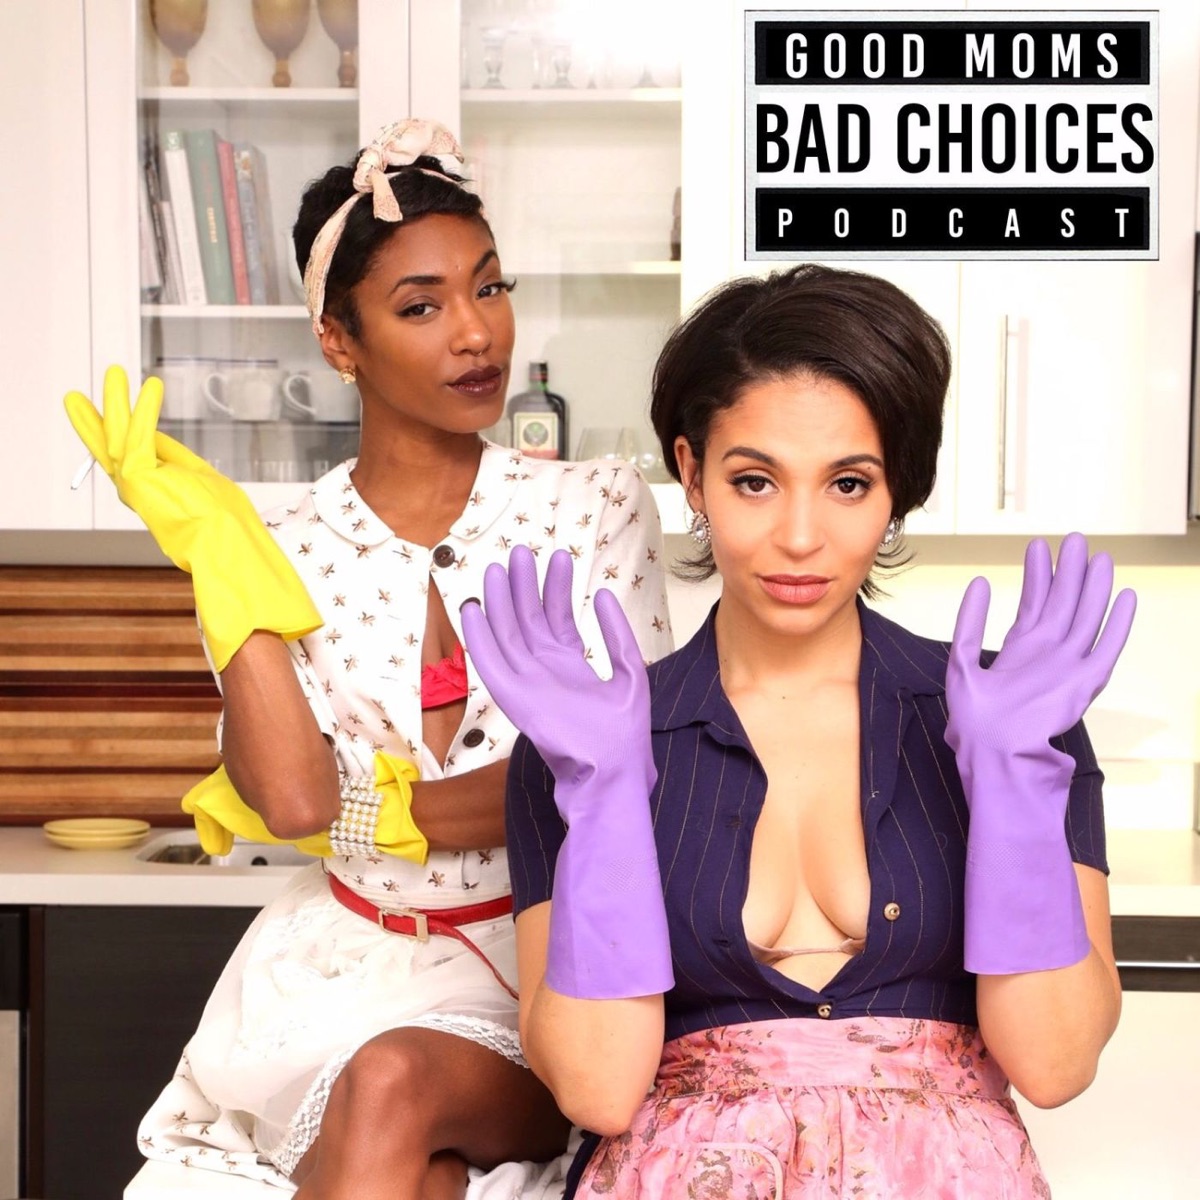 Couples Nude Beach Tampon - Good Moms Bad Choices - Podcast â€“ Podtail